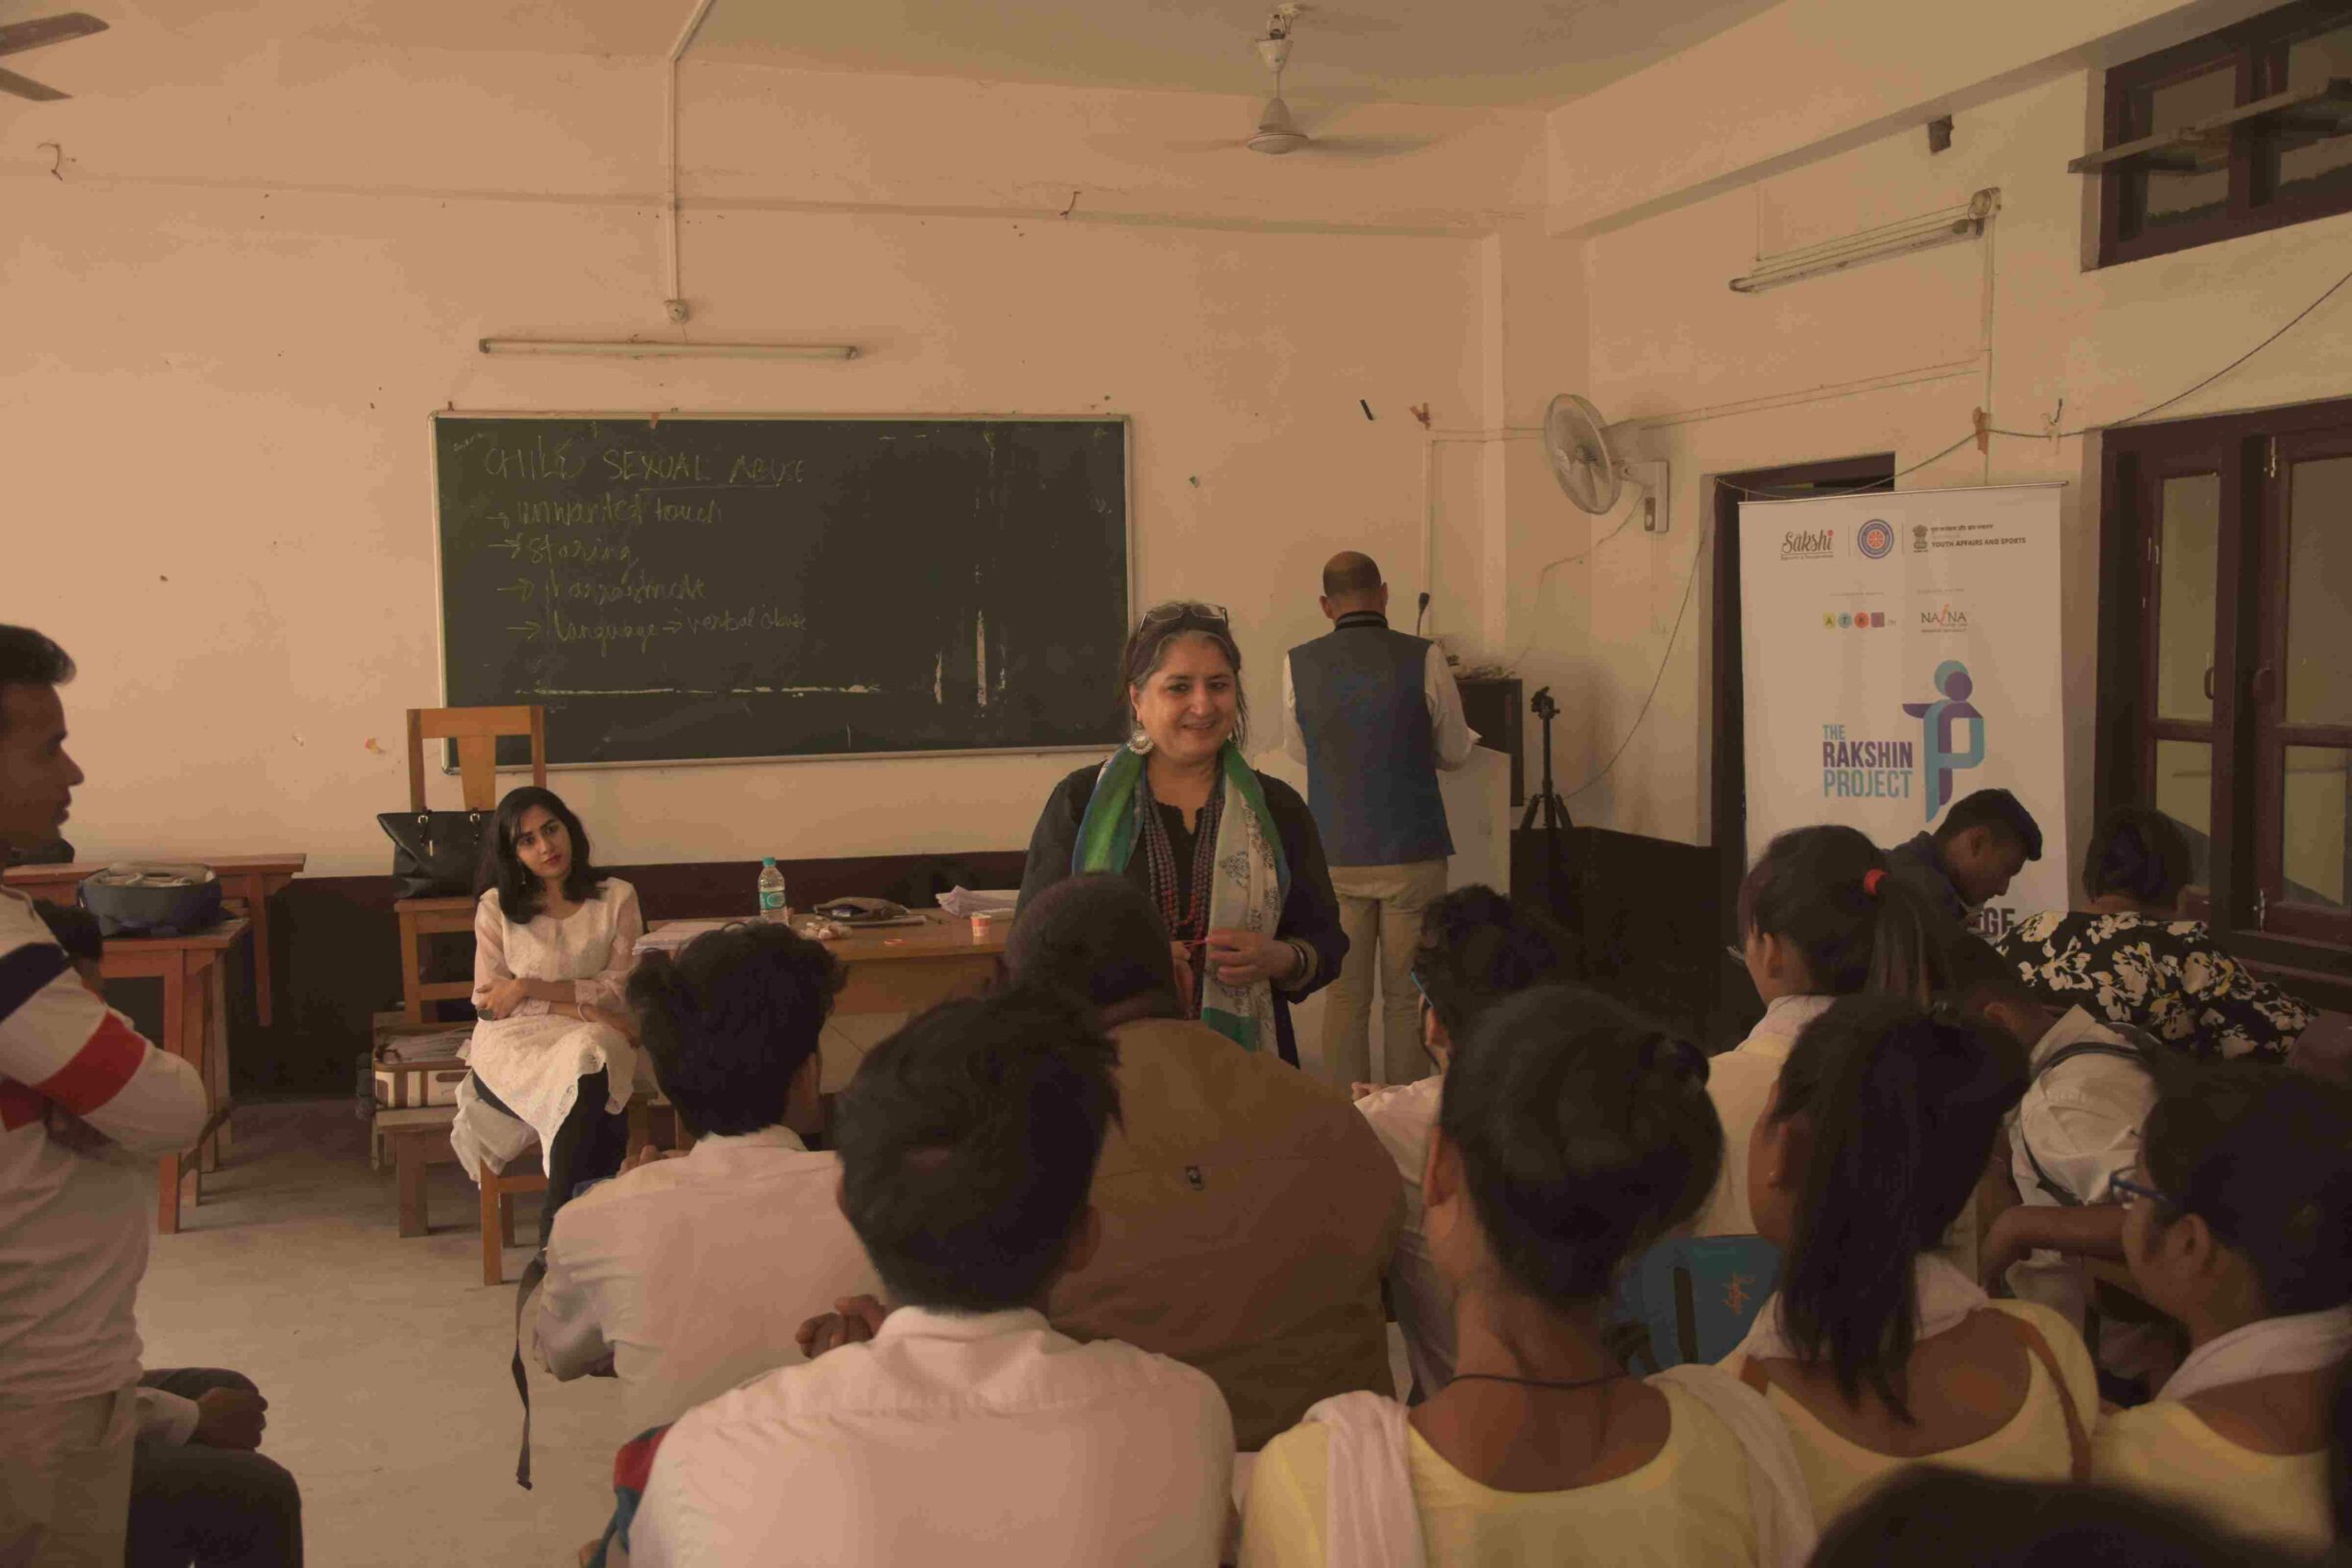 Smita Bharti works with survivors of abuse and trauma and helps them heal through theatre